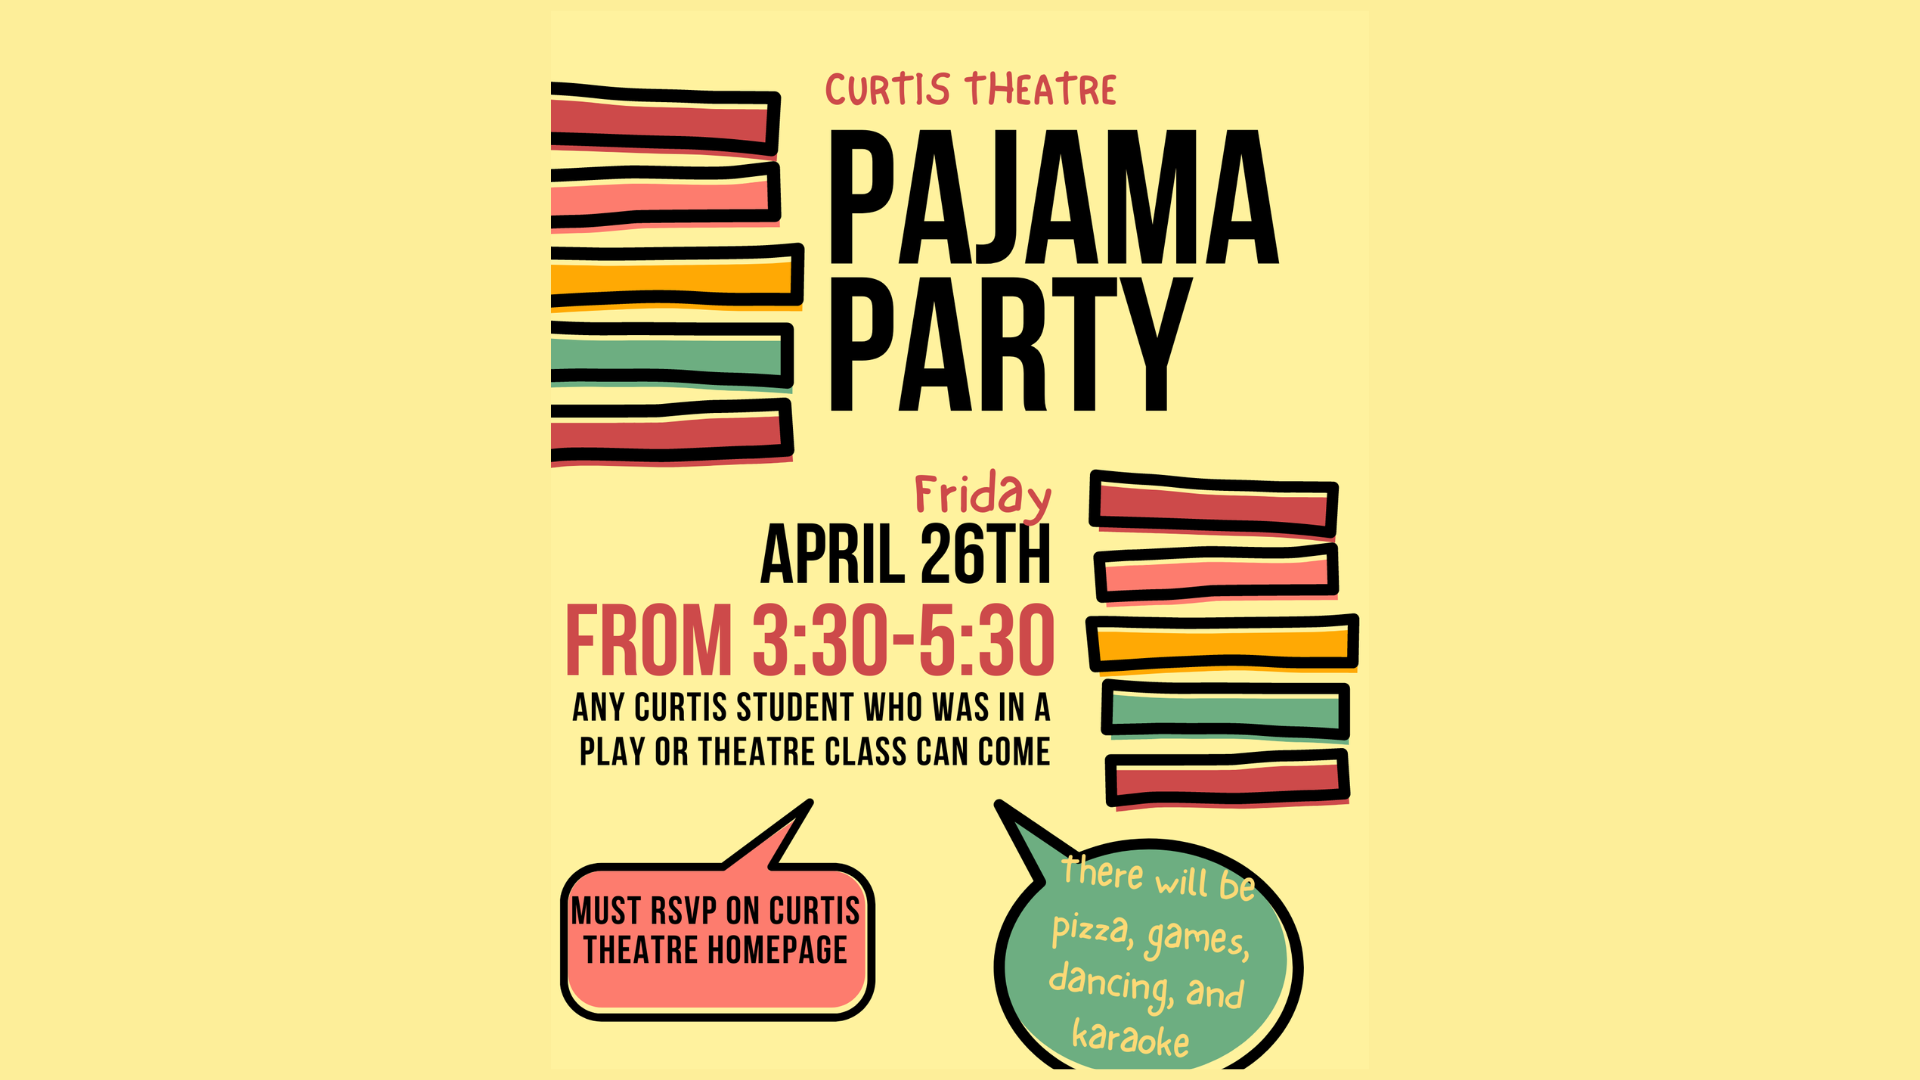 Curtis Theatre Pajama Party: Friday, April 26th from 4:30-5:30.  Any Curtis student who was in a play or theatre class can come.  Must RSVP on the Curtis Theatre Homepage.  There will be pizza, games, dancing, and karaoke.